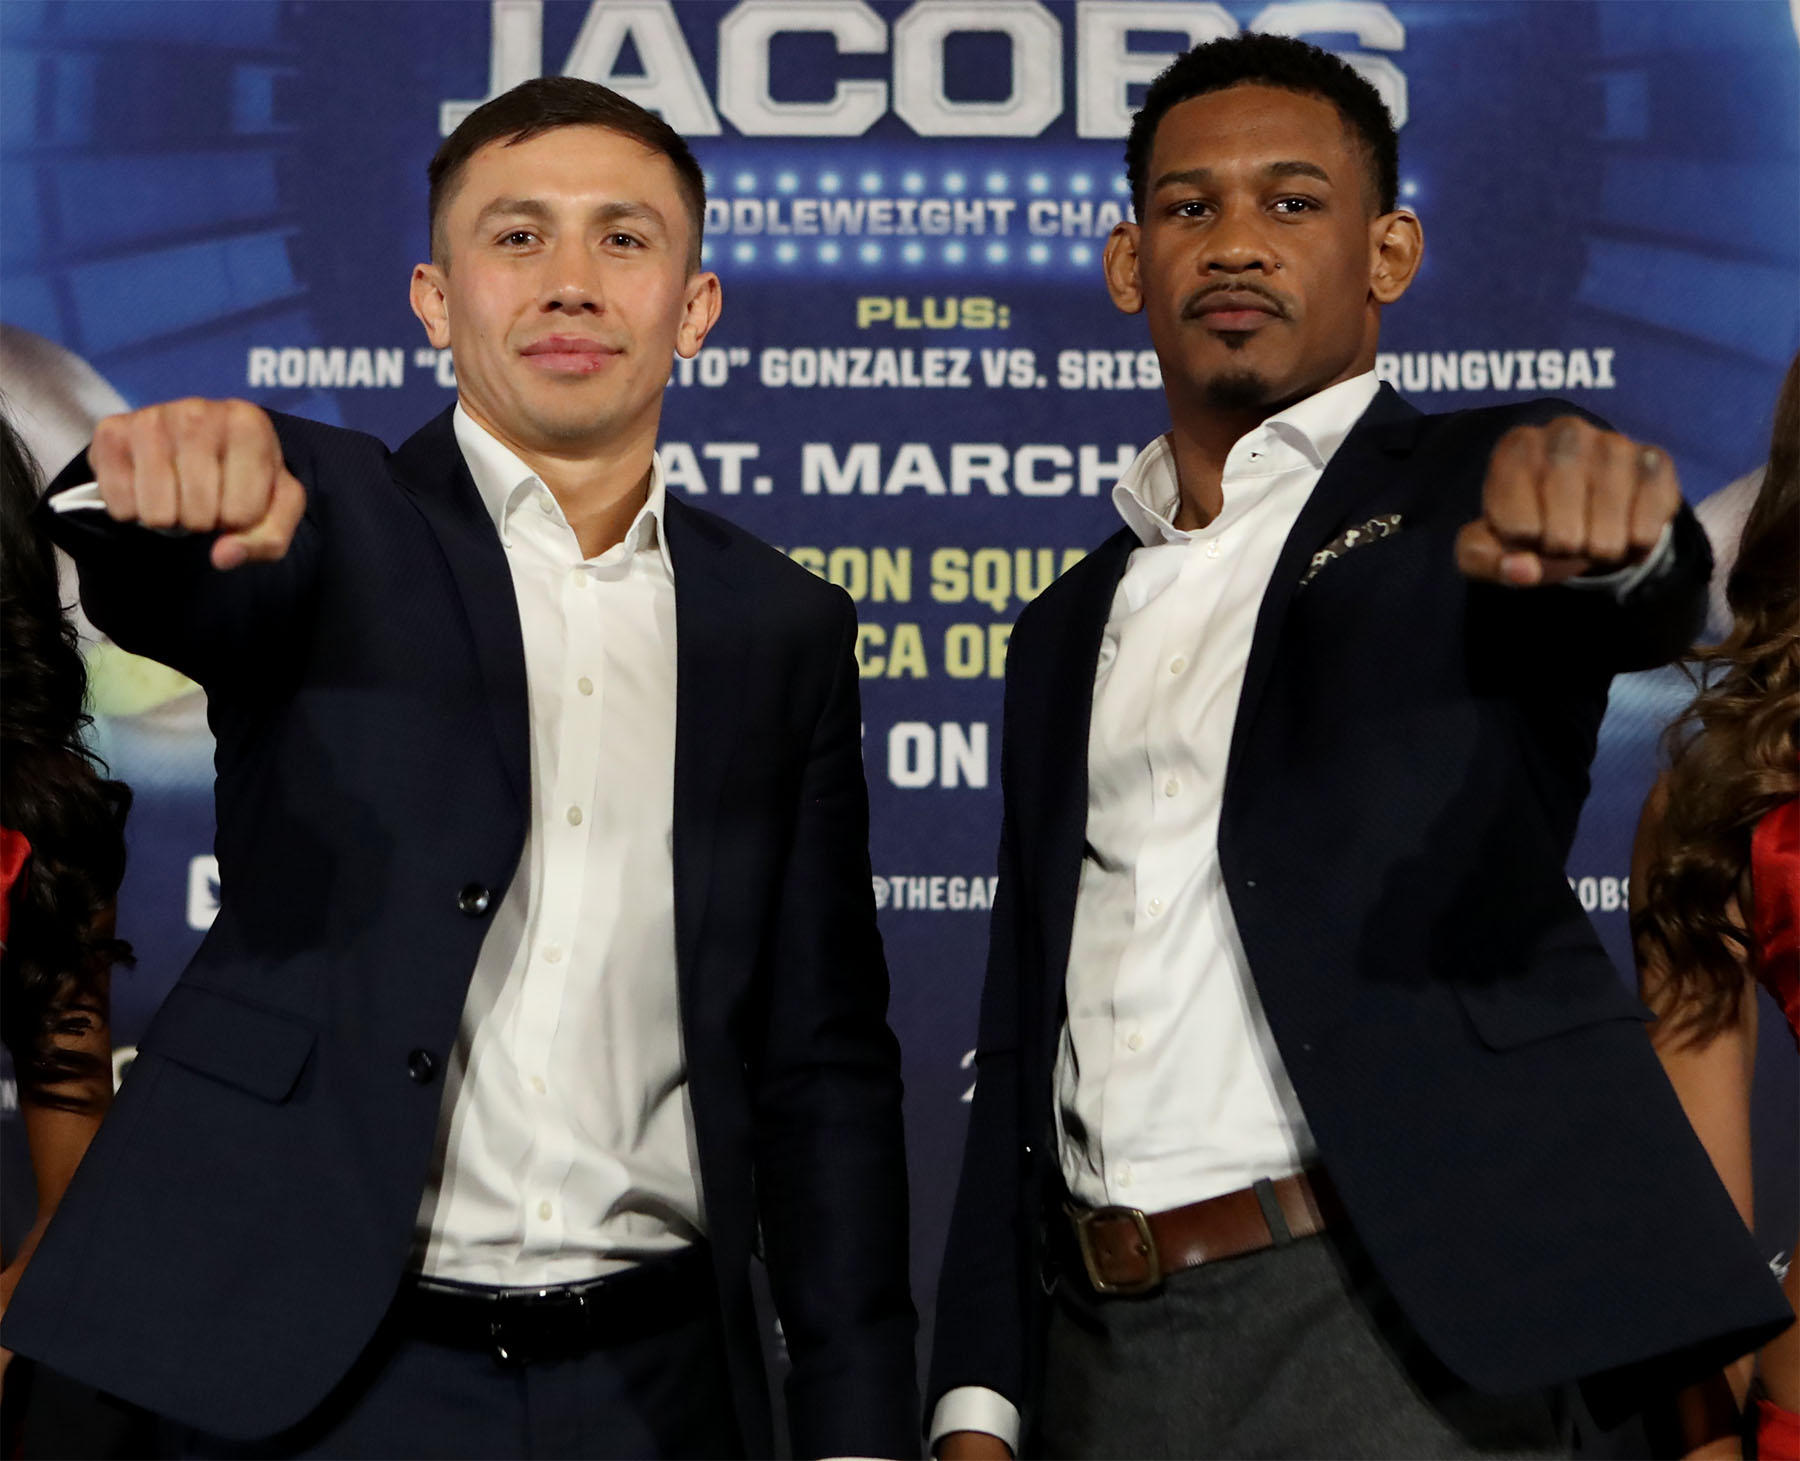 Gennady Golovkin vs. Daniel Jacobs: Fight Odds, Analysis and Prediction 